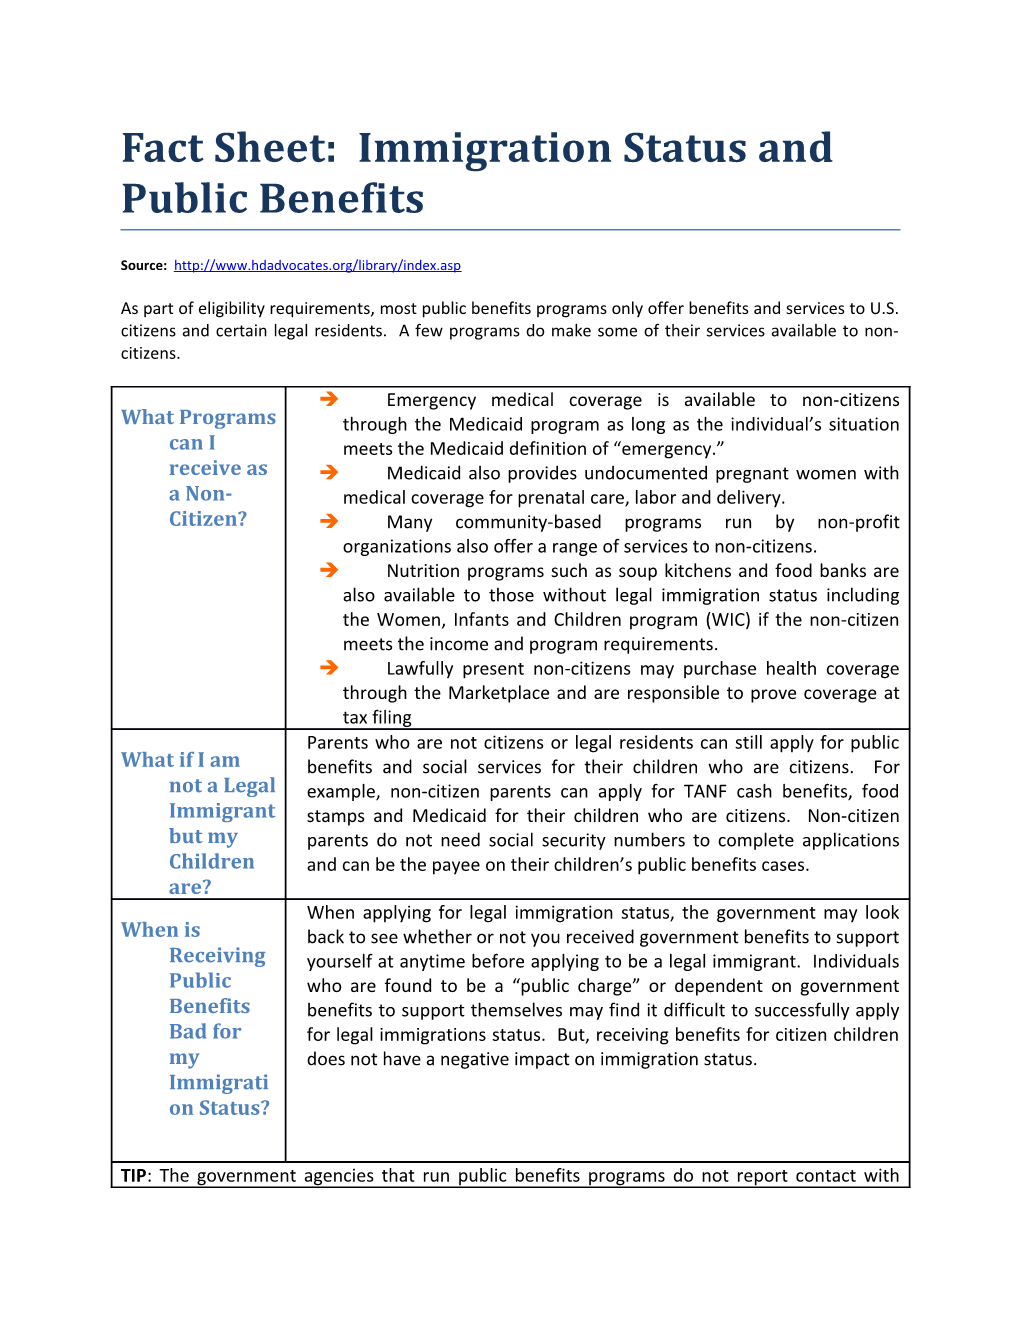 Fact Sheet: Immigration Status and Public Benefits